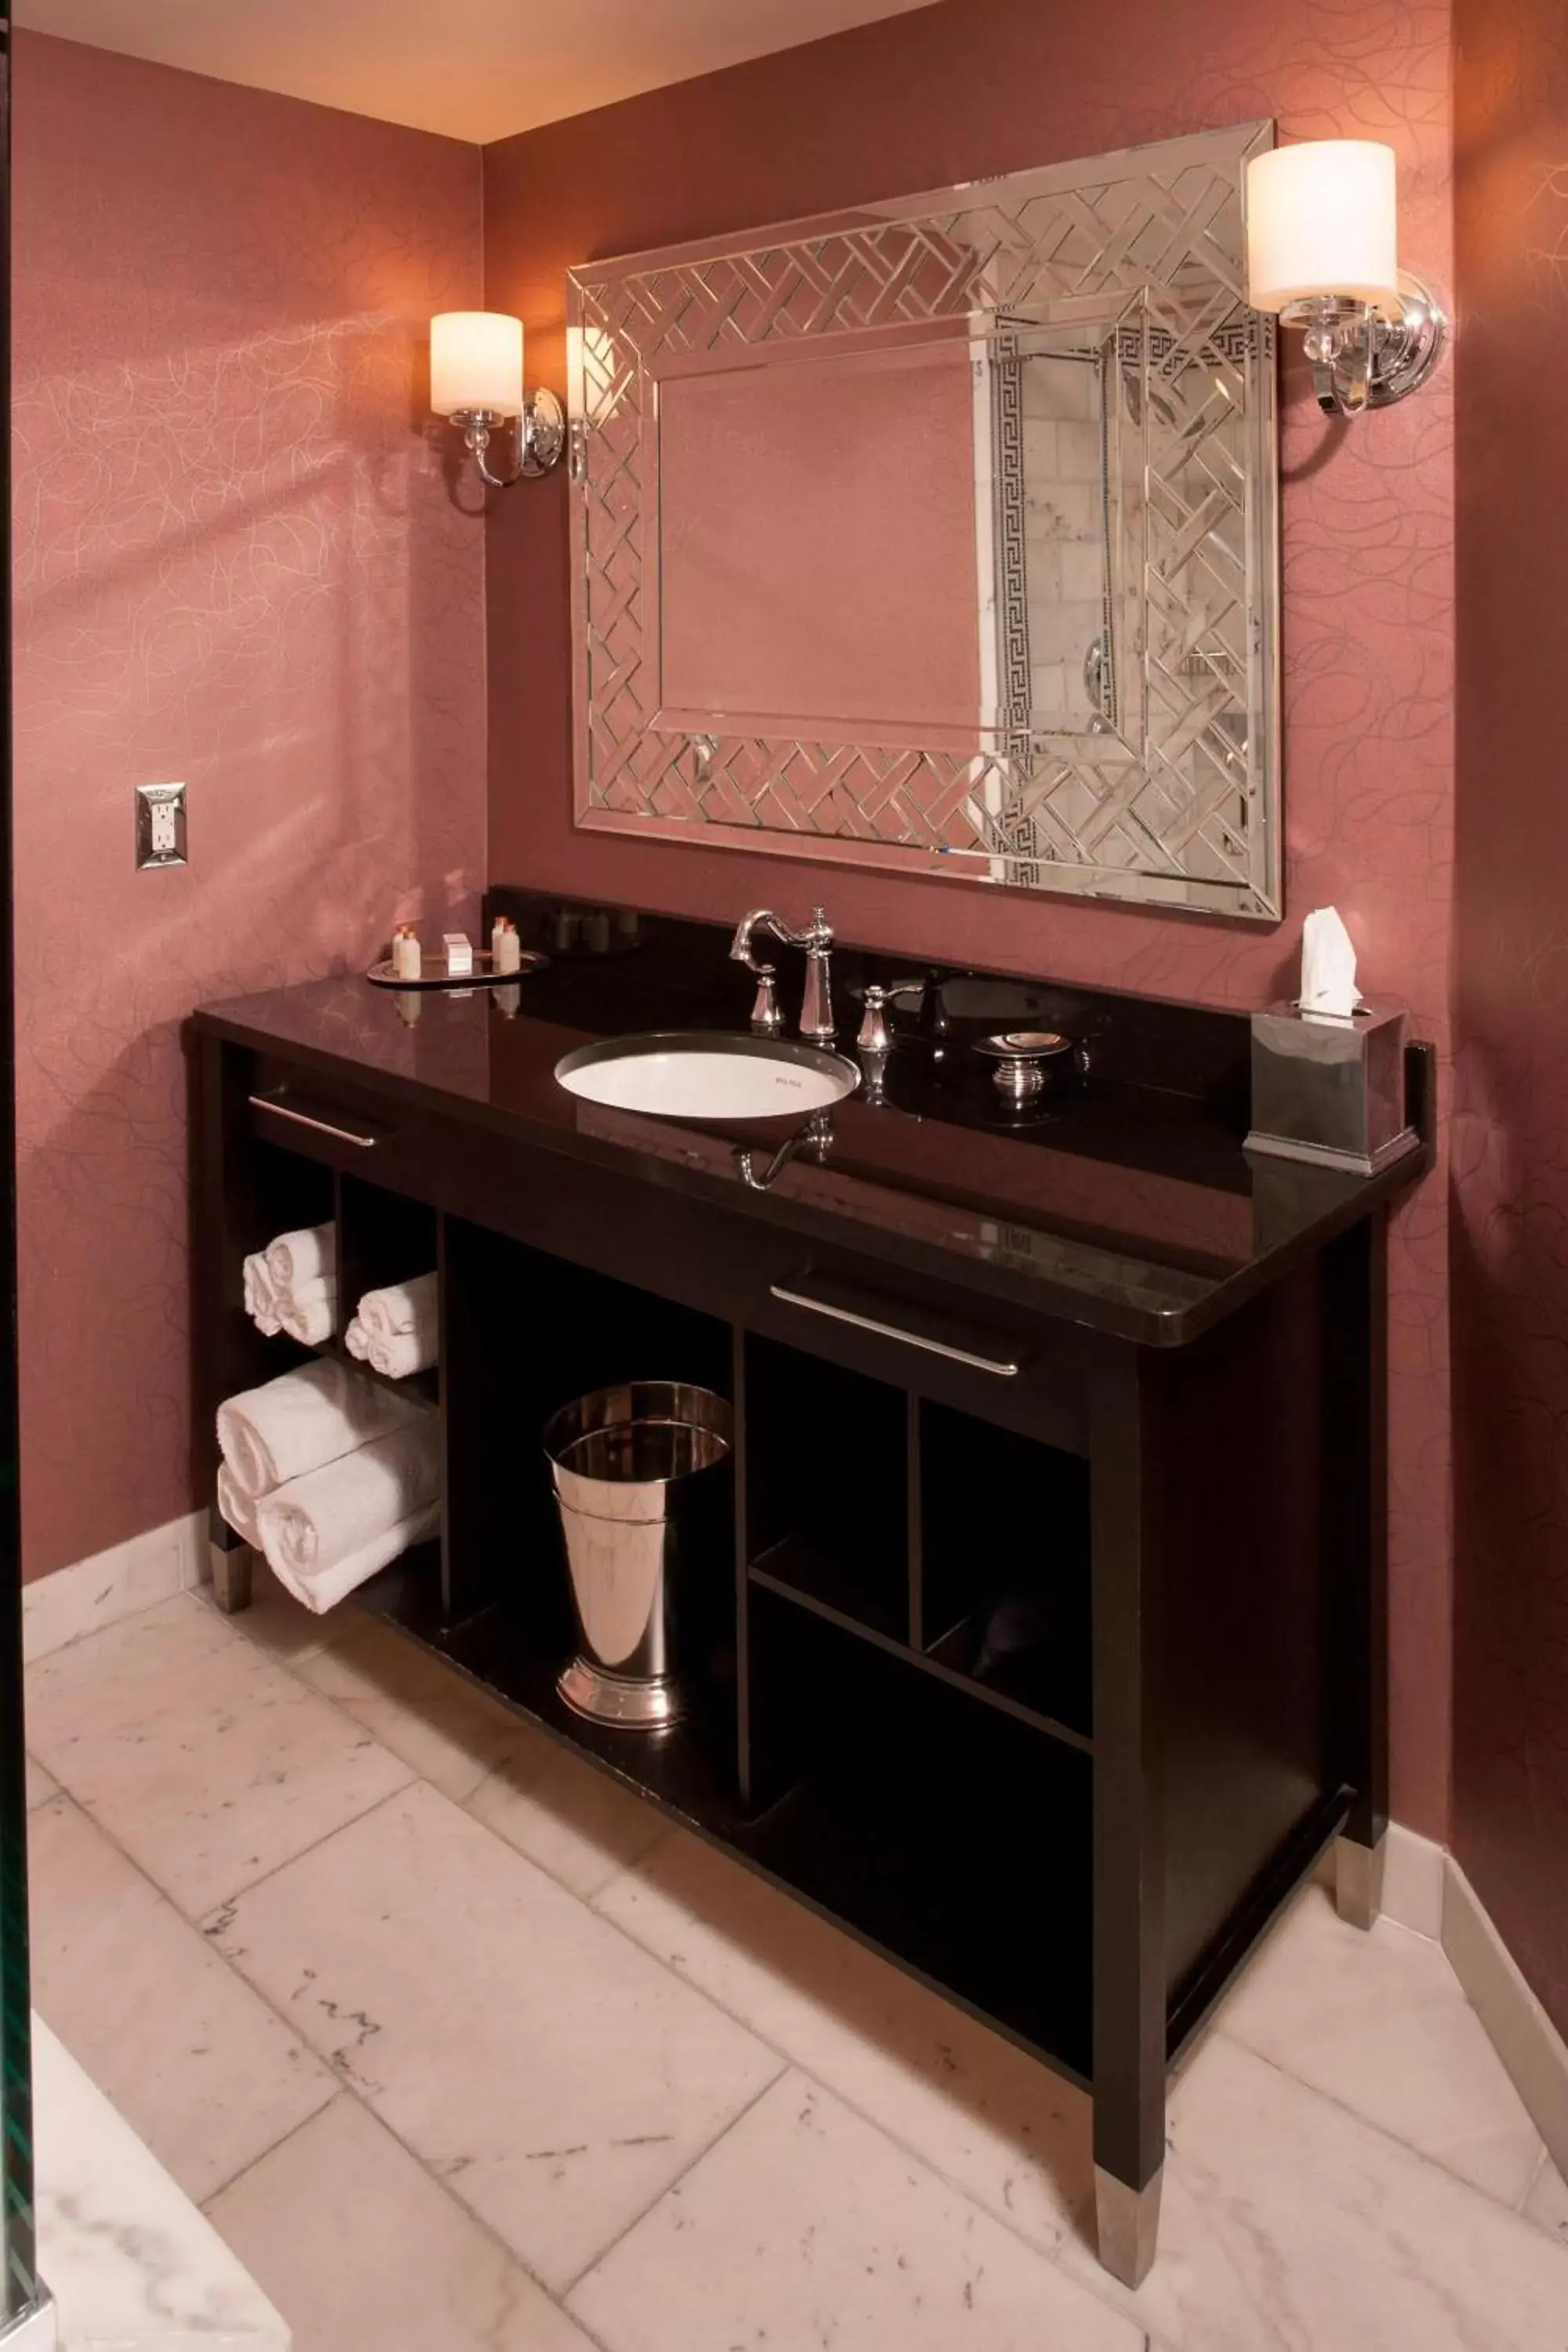 Bathroom in The Siena Hotel, Autograph Collection